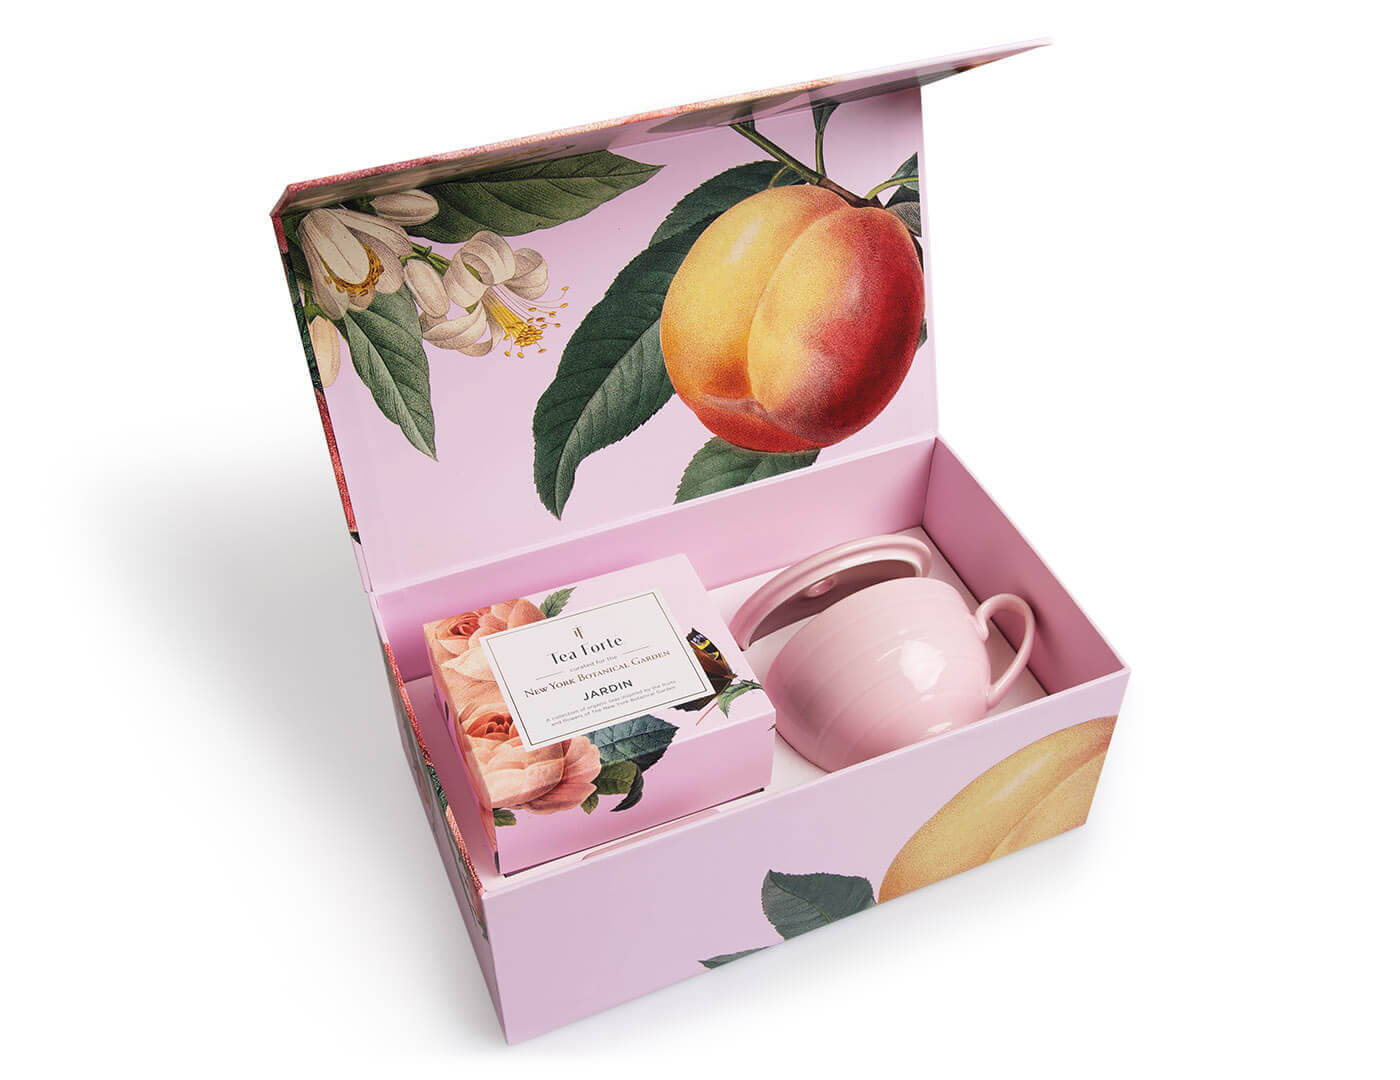 An open Jardin Collection Gift Set showing box contents